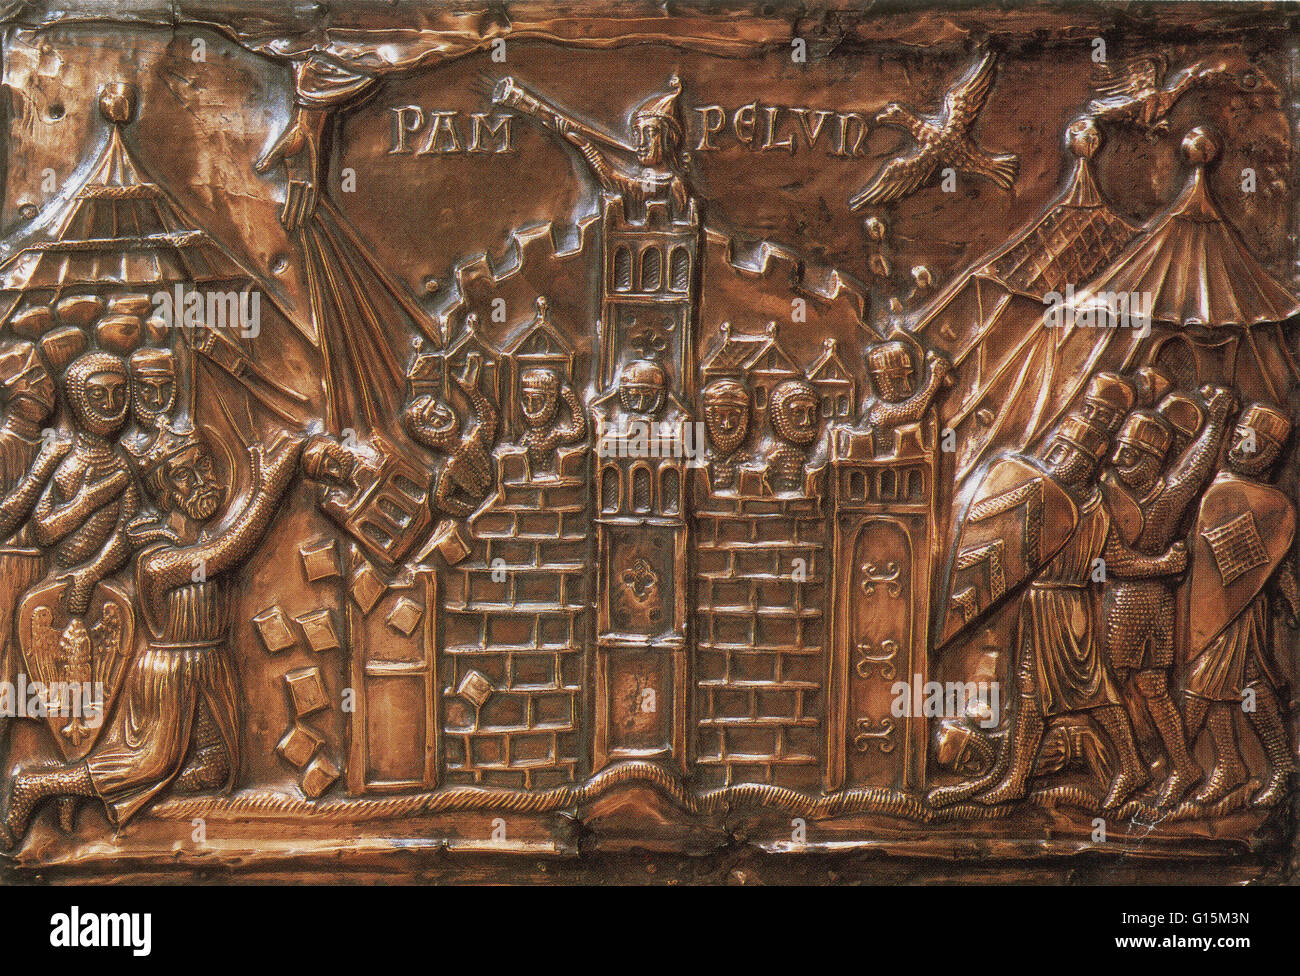 13th century panel from the Silver Shrine shows Charlemagne besieging a city. Charlemagne (742-814 AD) was King of the Franks from 768 and Emperor of the Romans (Imperator Romanorum) from 800 to his death in 814. He expanded the Frankish kingdom into an e Stock Photo